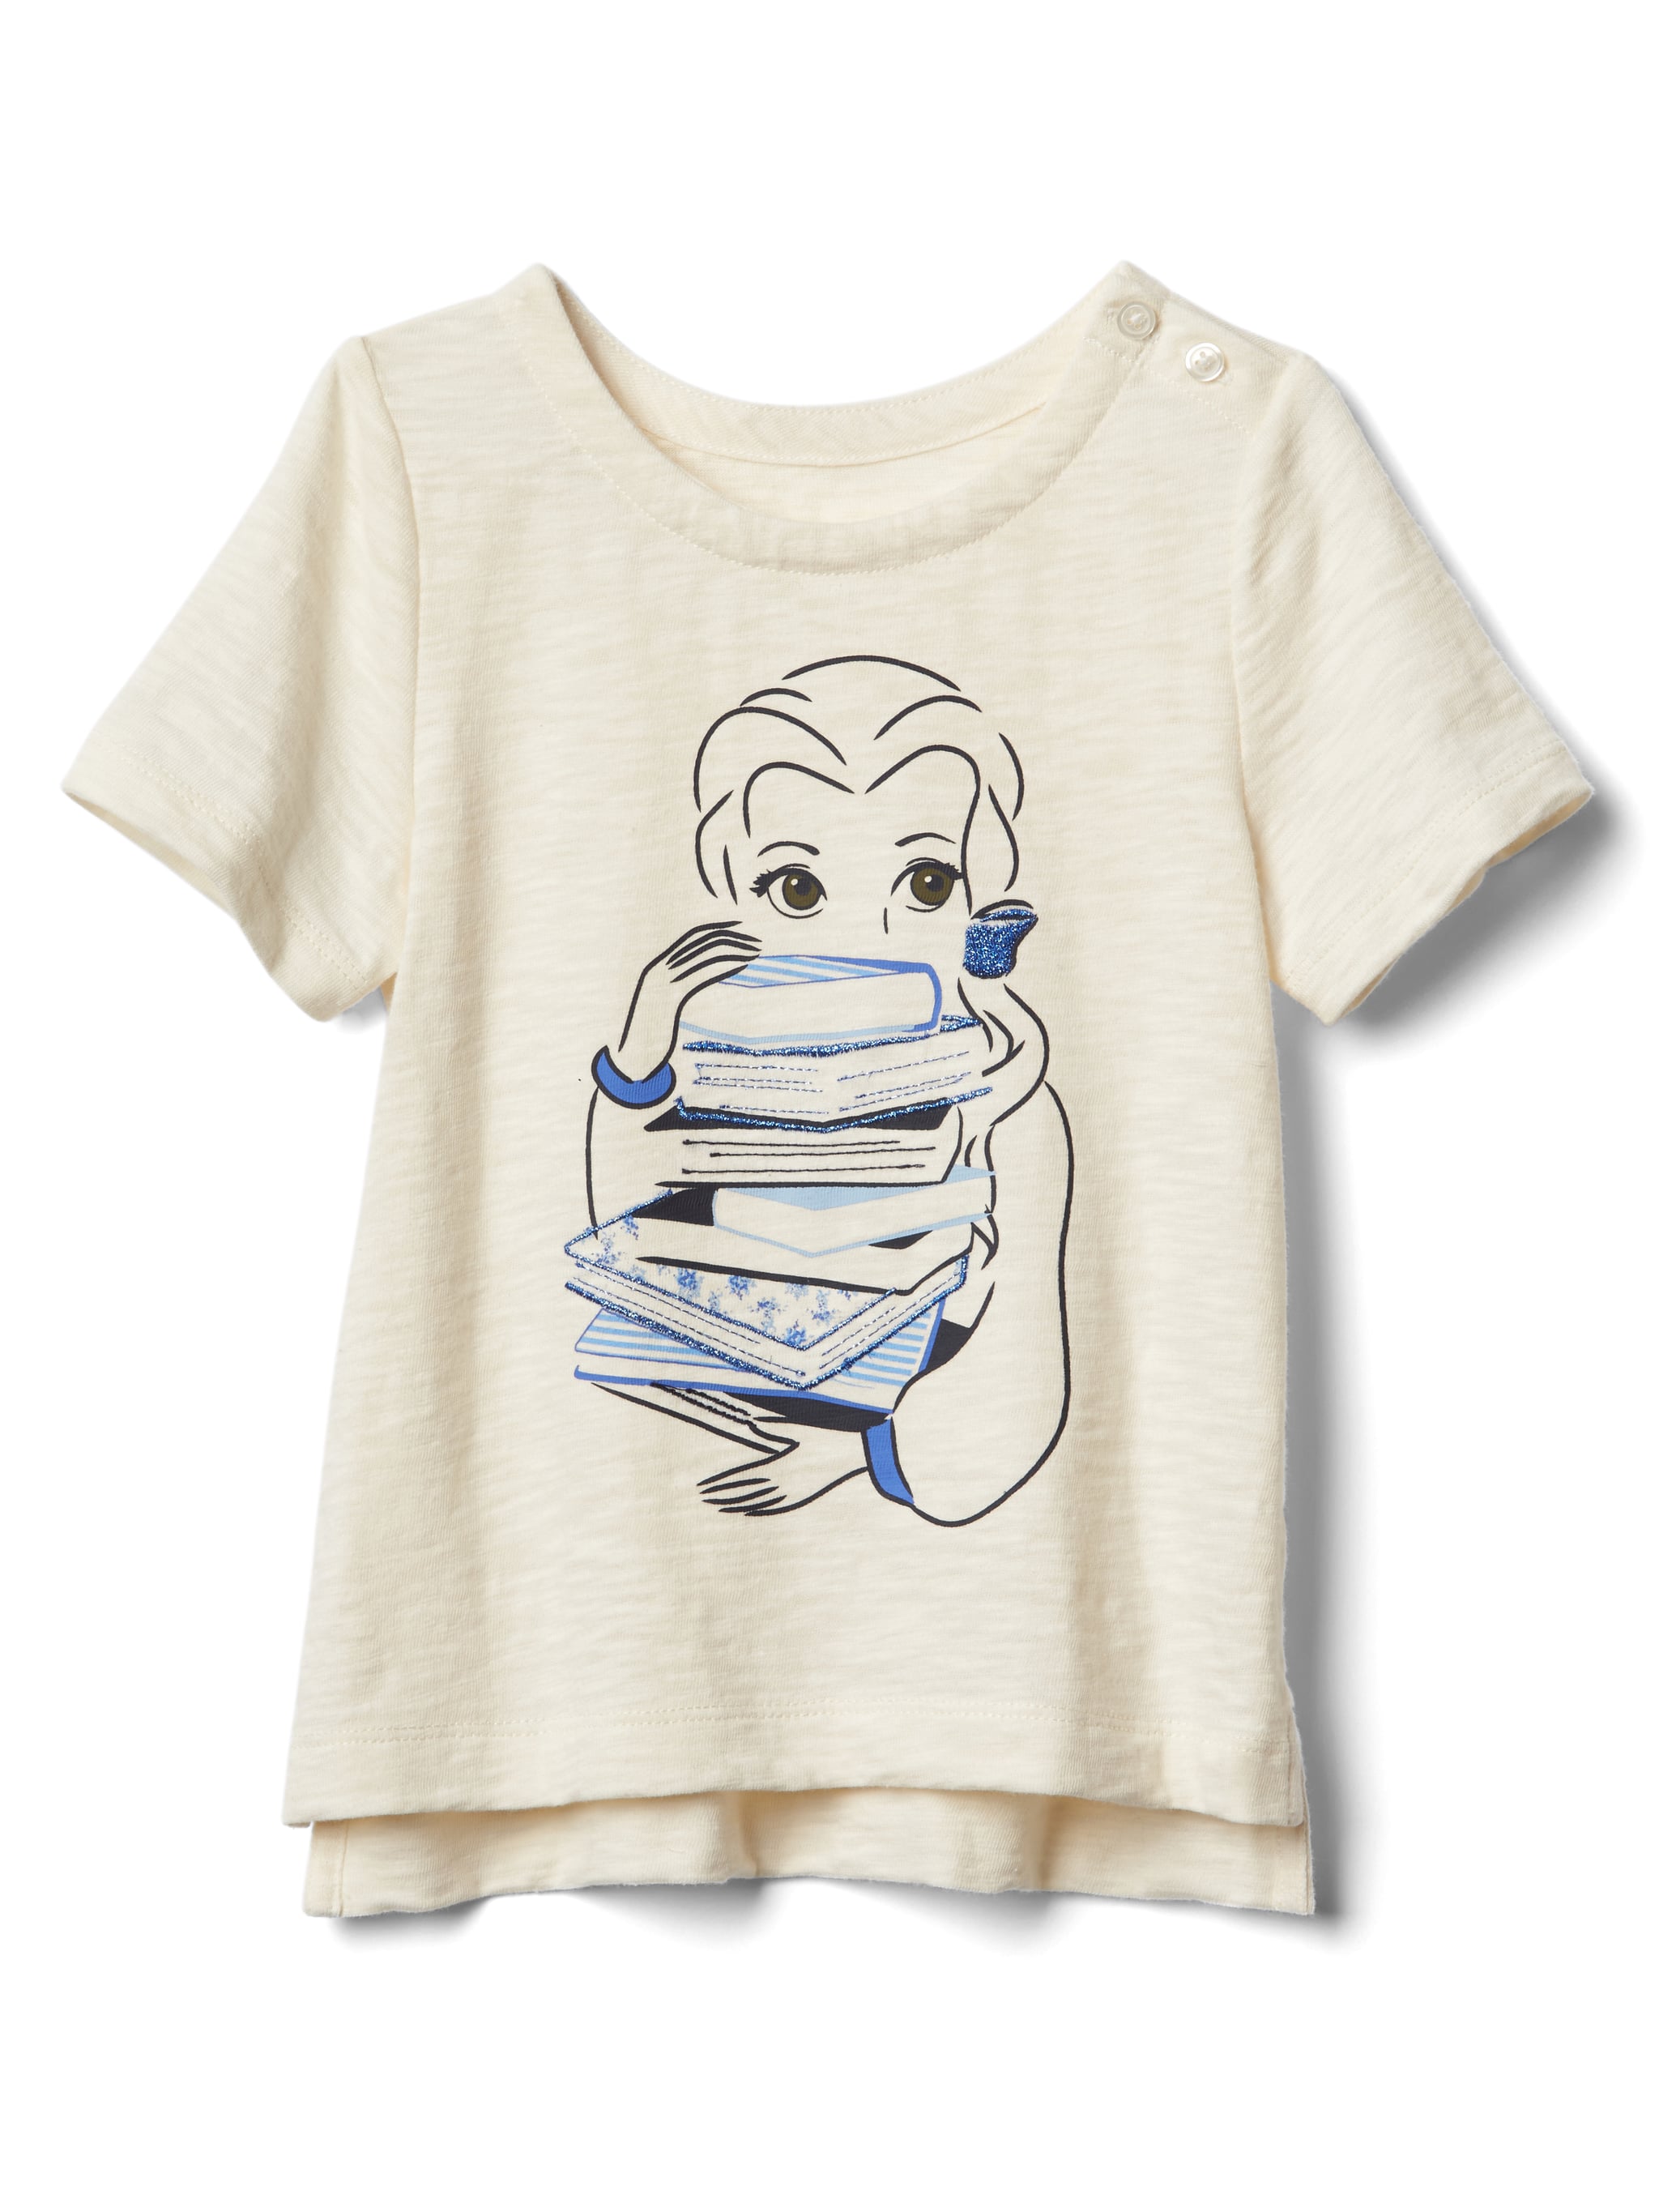 Gap Disney S Beauty And The Beast Collection 17 Popsugar Family